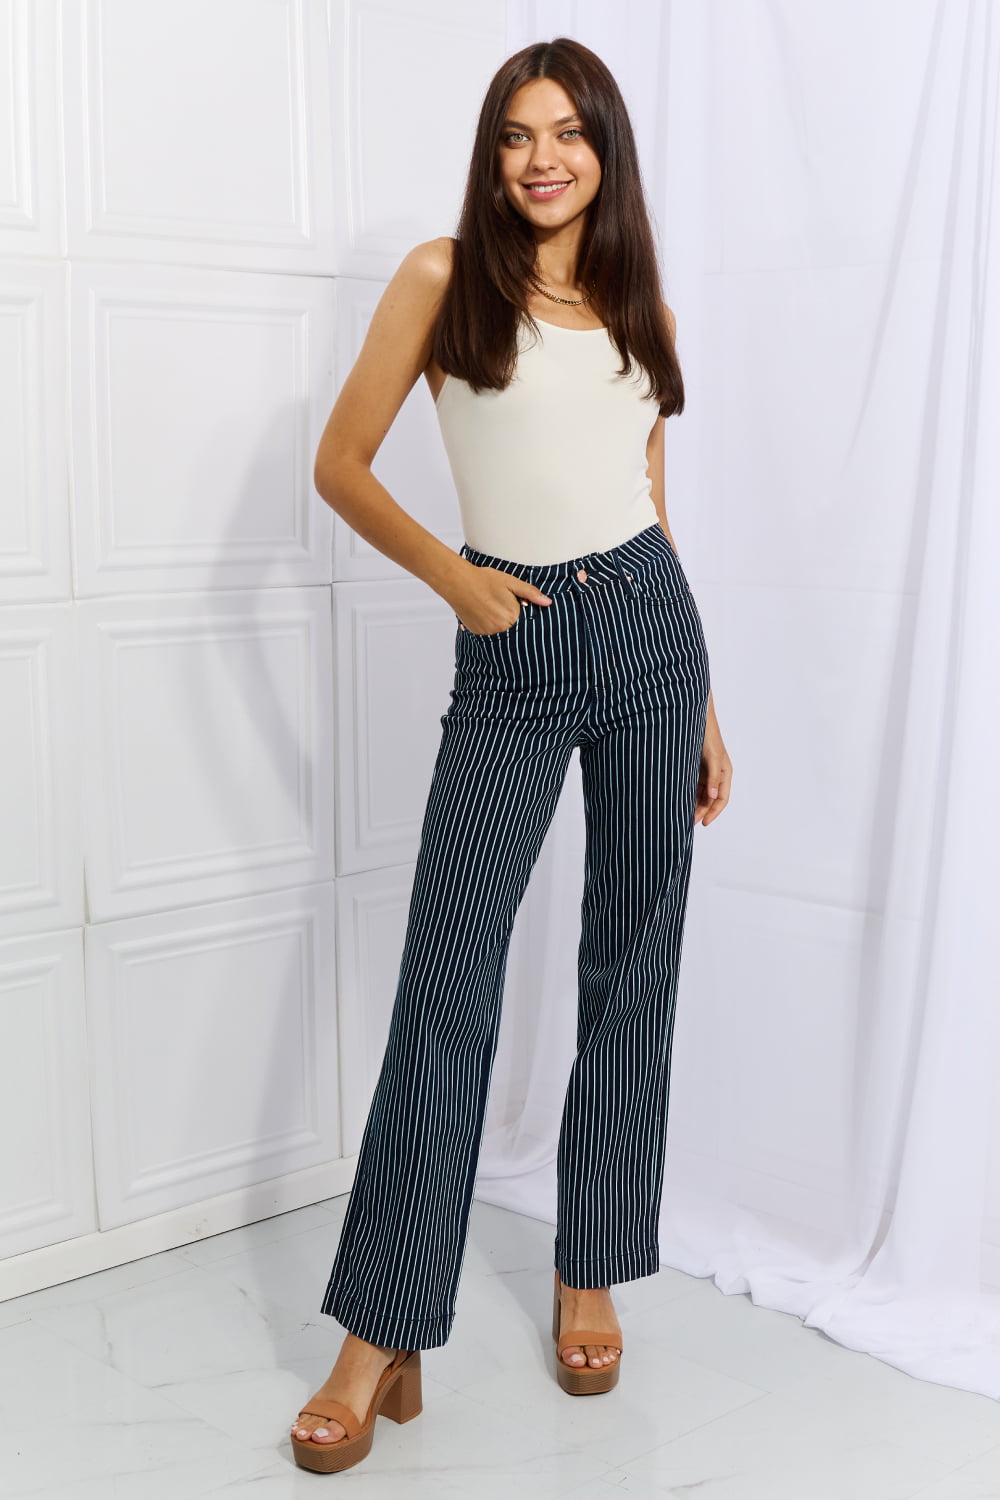 Judy Blue Cassidy High Waisted Striped Straight Jeans